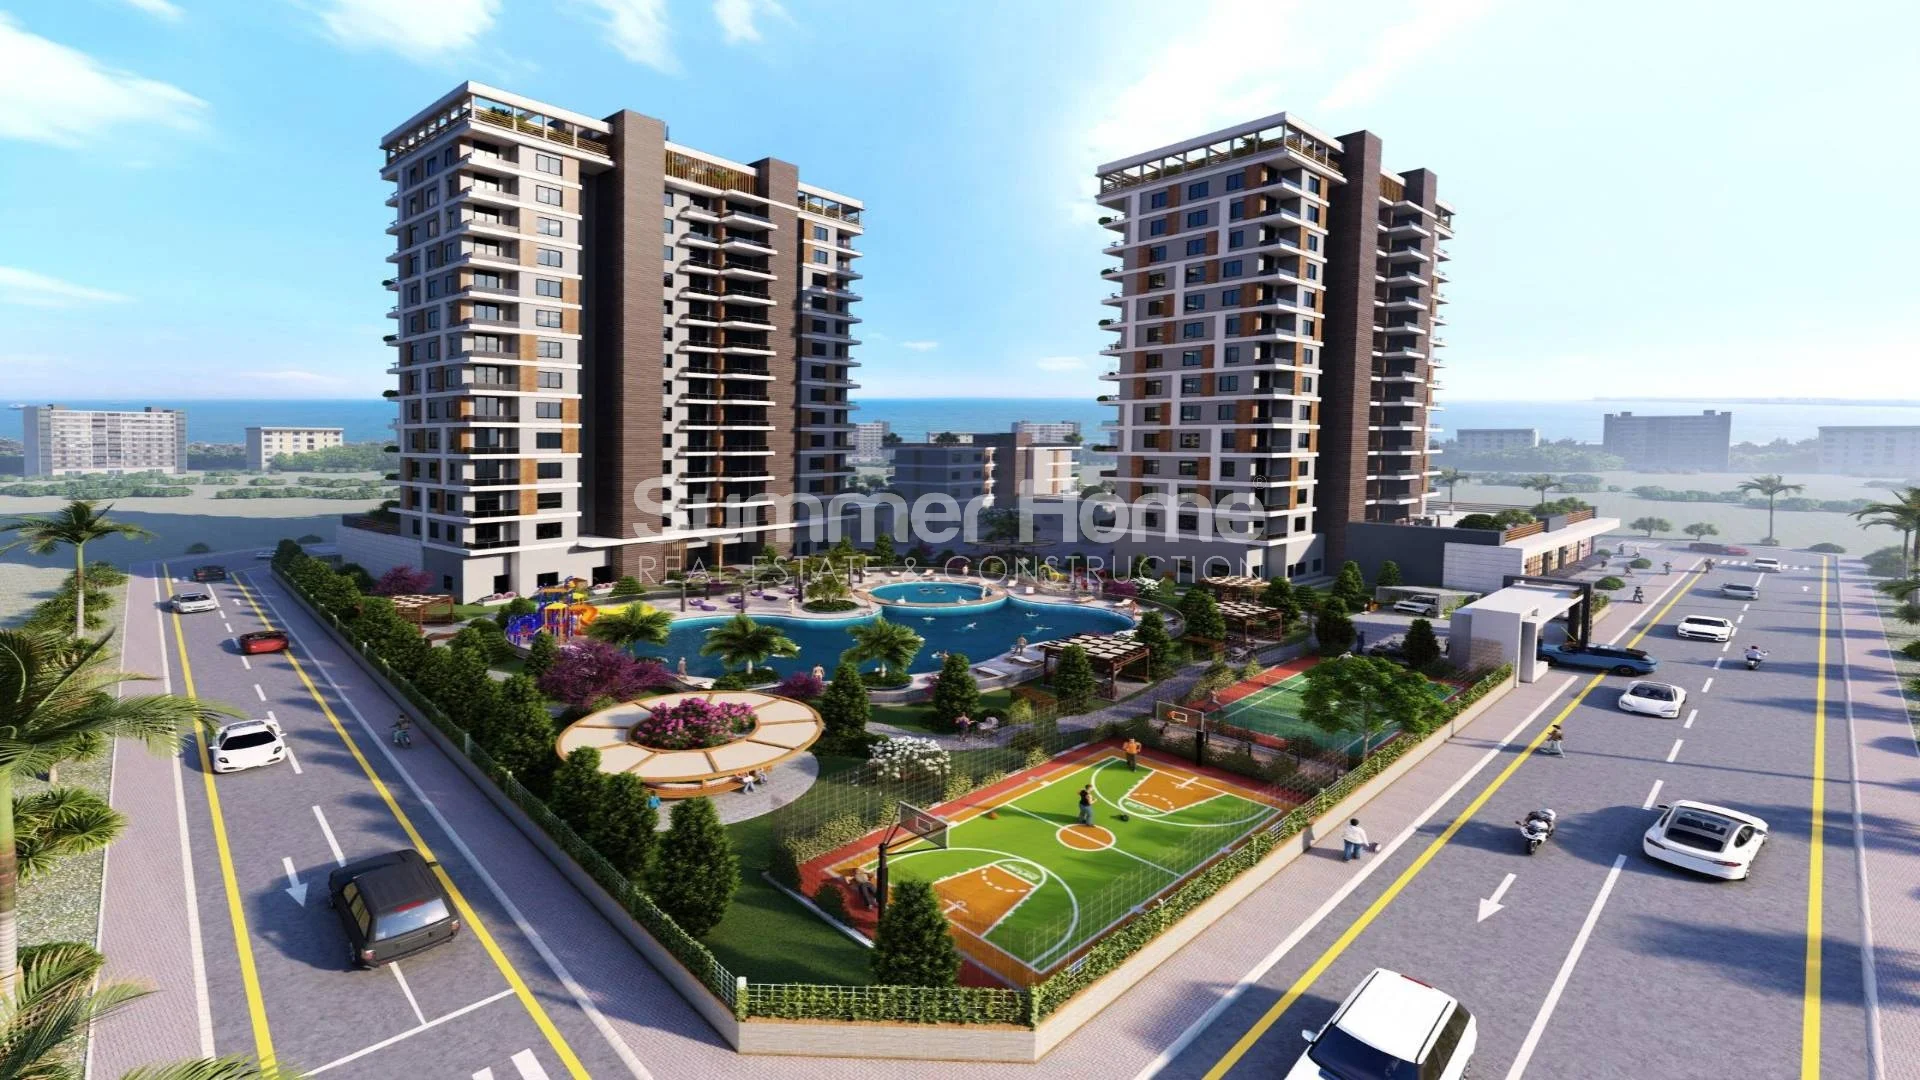 Highly stylish apartments located in Mezitli, Mersin Plan - 26